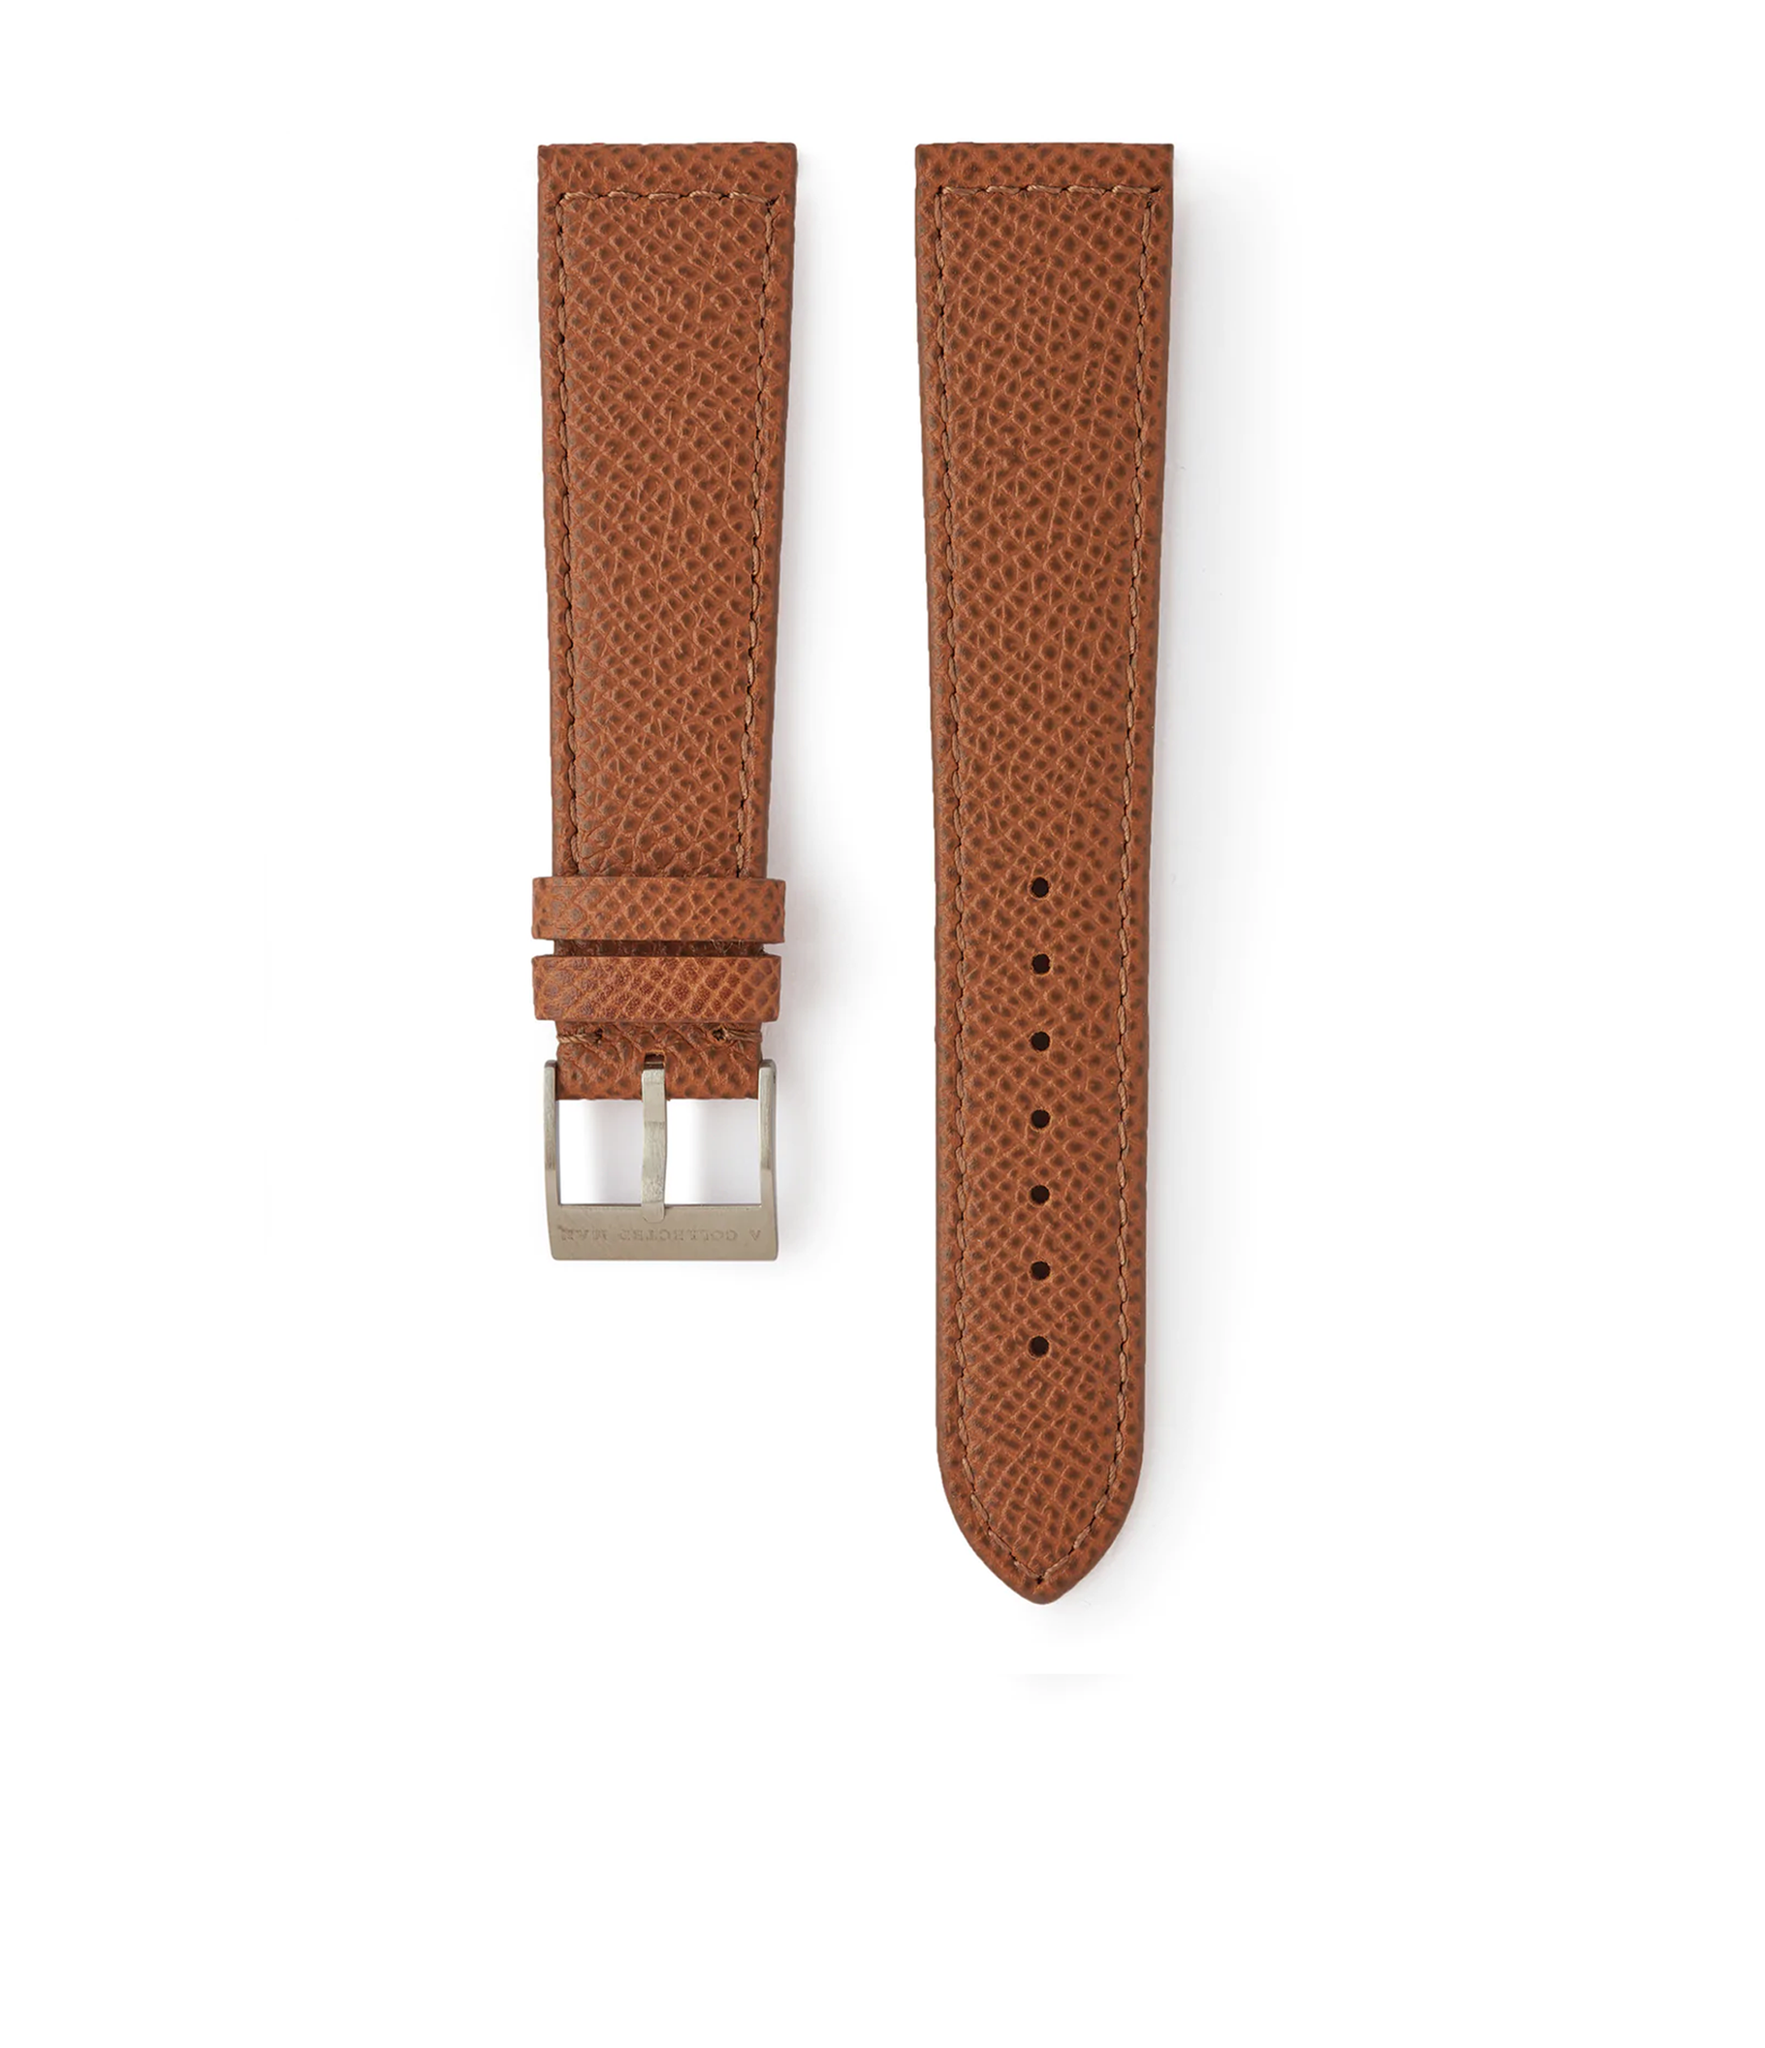 Buy saffiano quality watch strap in gilded amber brown from A Collected Man London, in short or regular lengths. We are proud to offer these hand-crafted watch straps, thoughtfully made in Europe, to suit your watch. Available to order online for worldwide delivery.